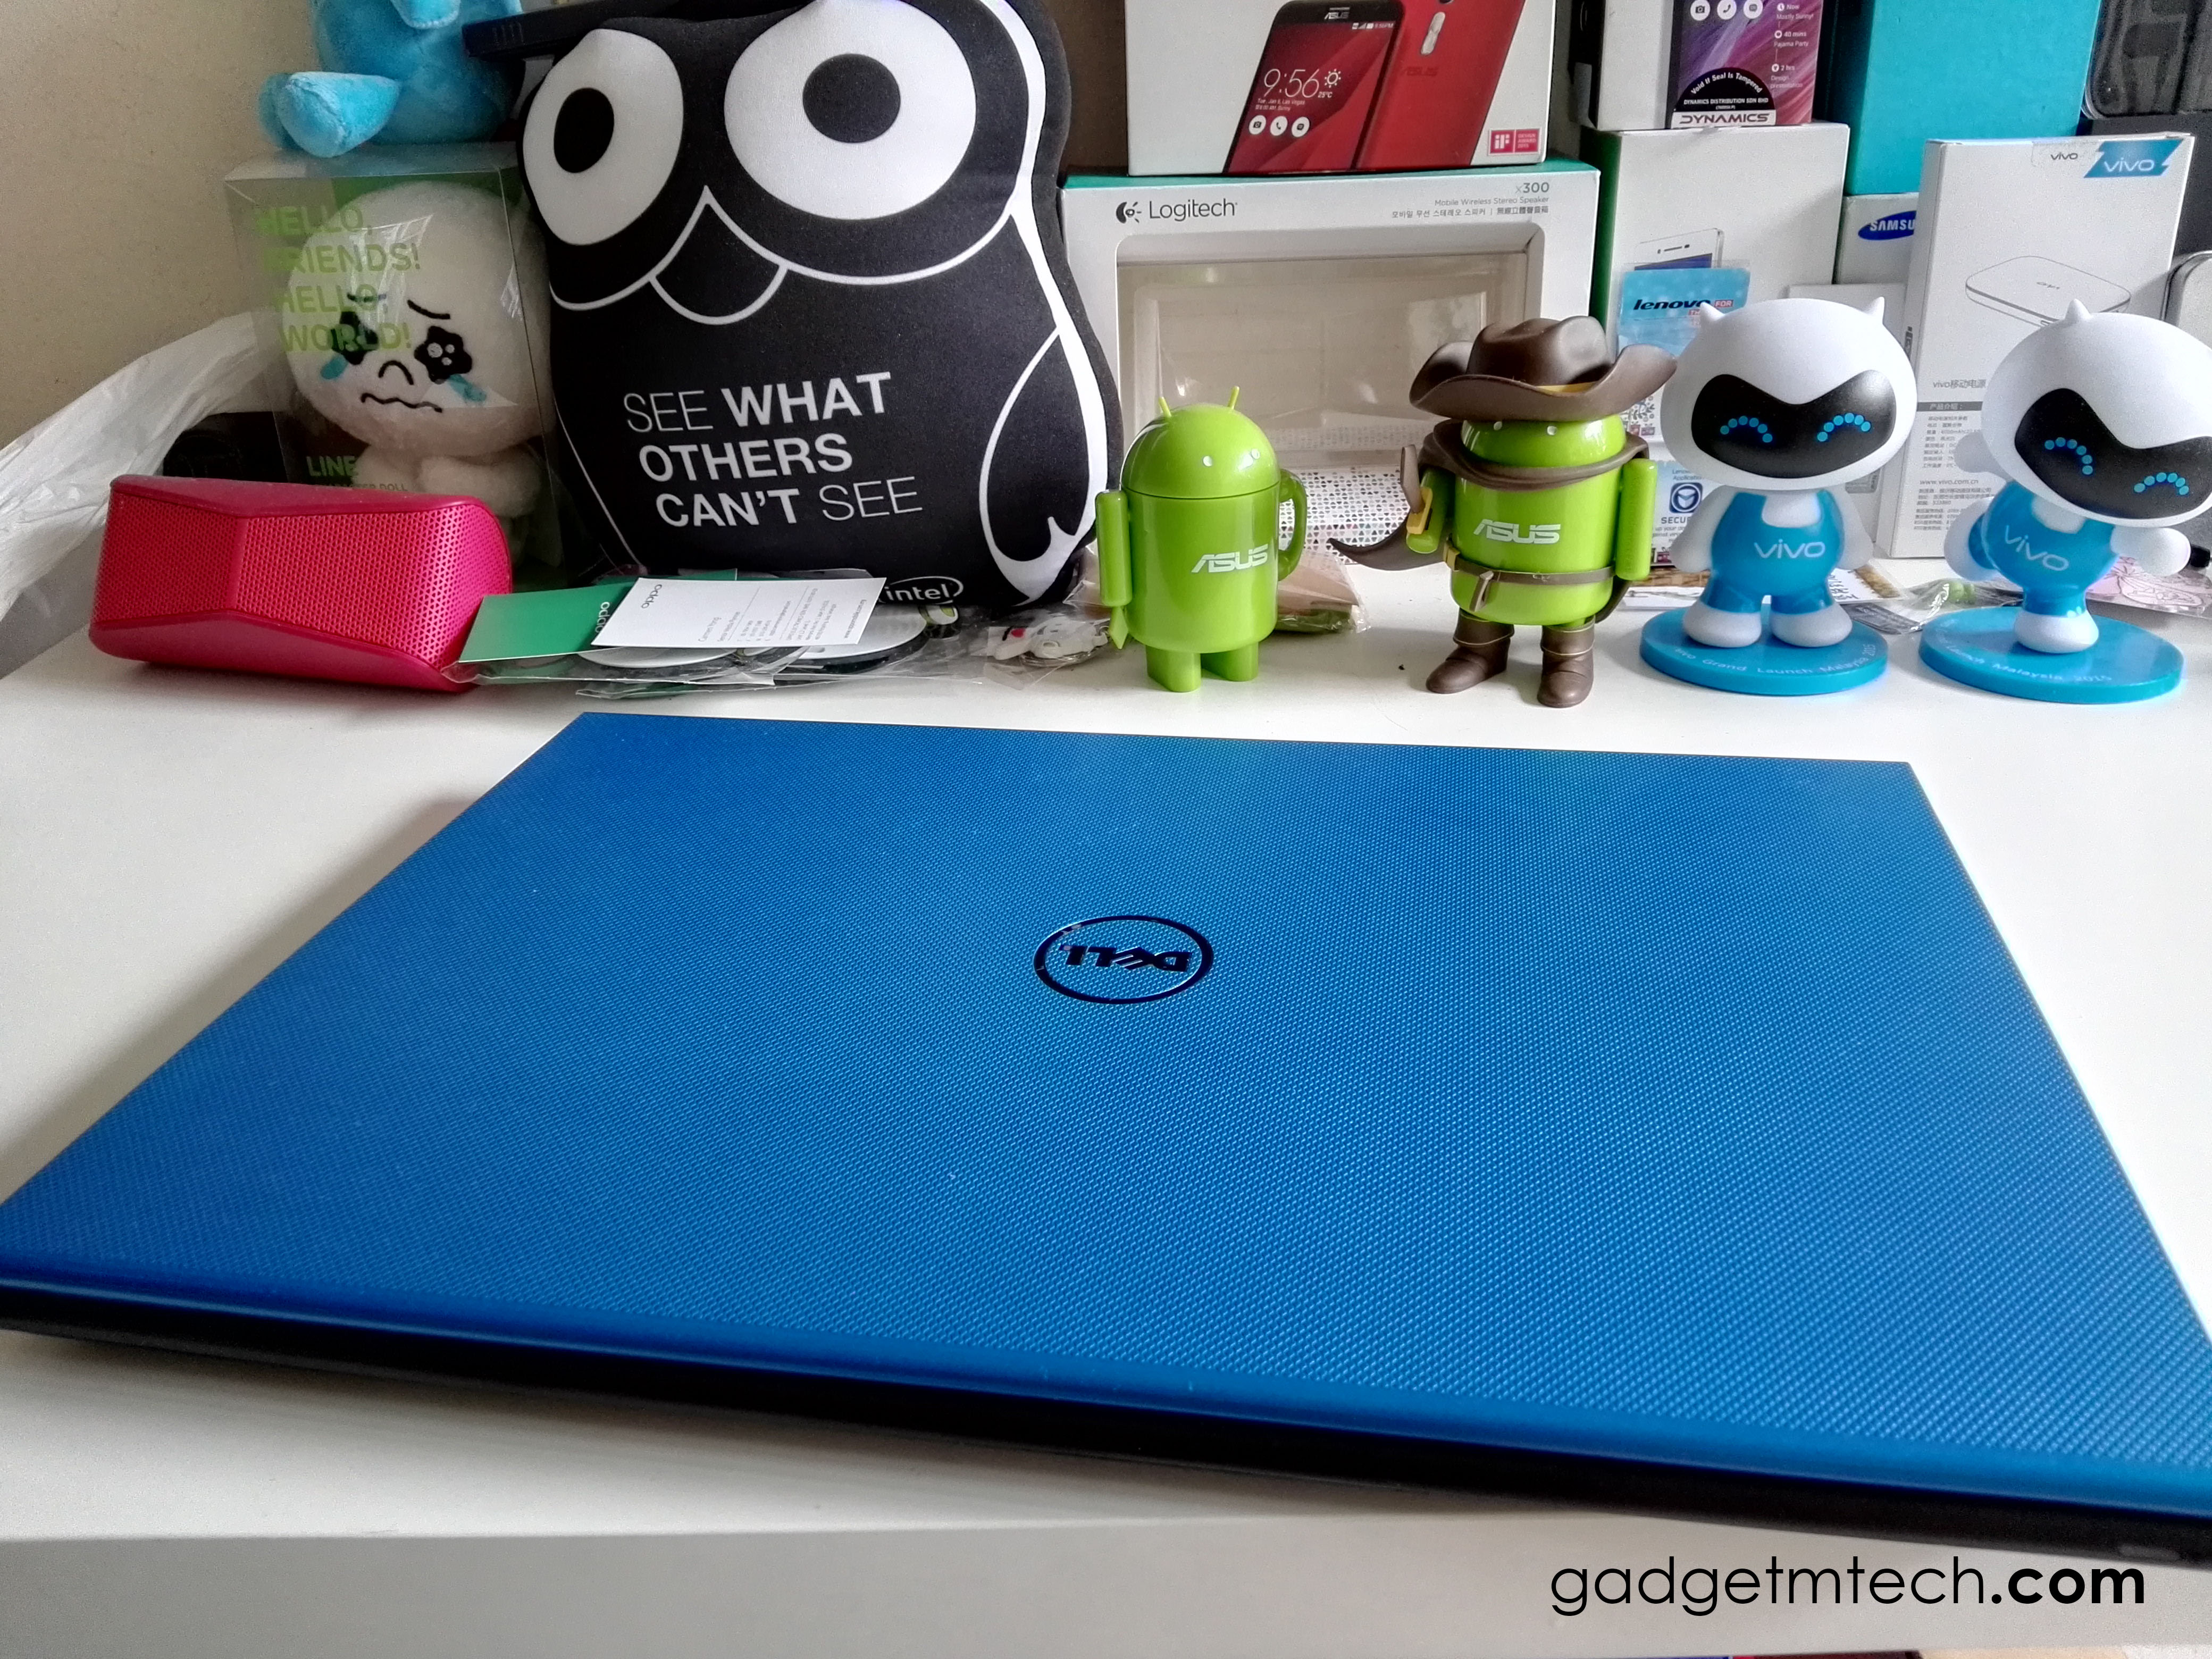 Dell Inspiron 15 3000 review